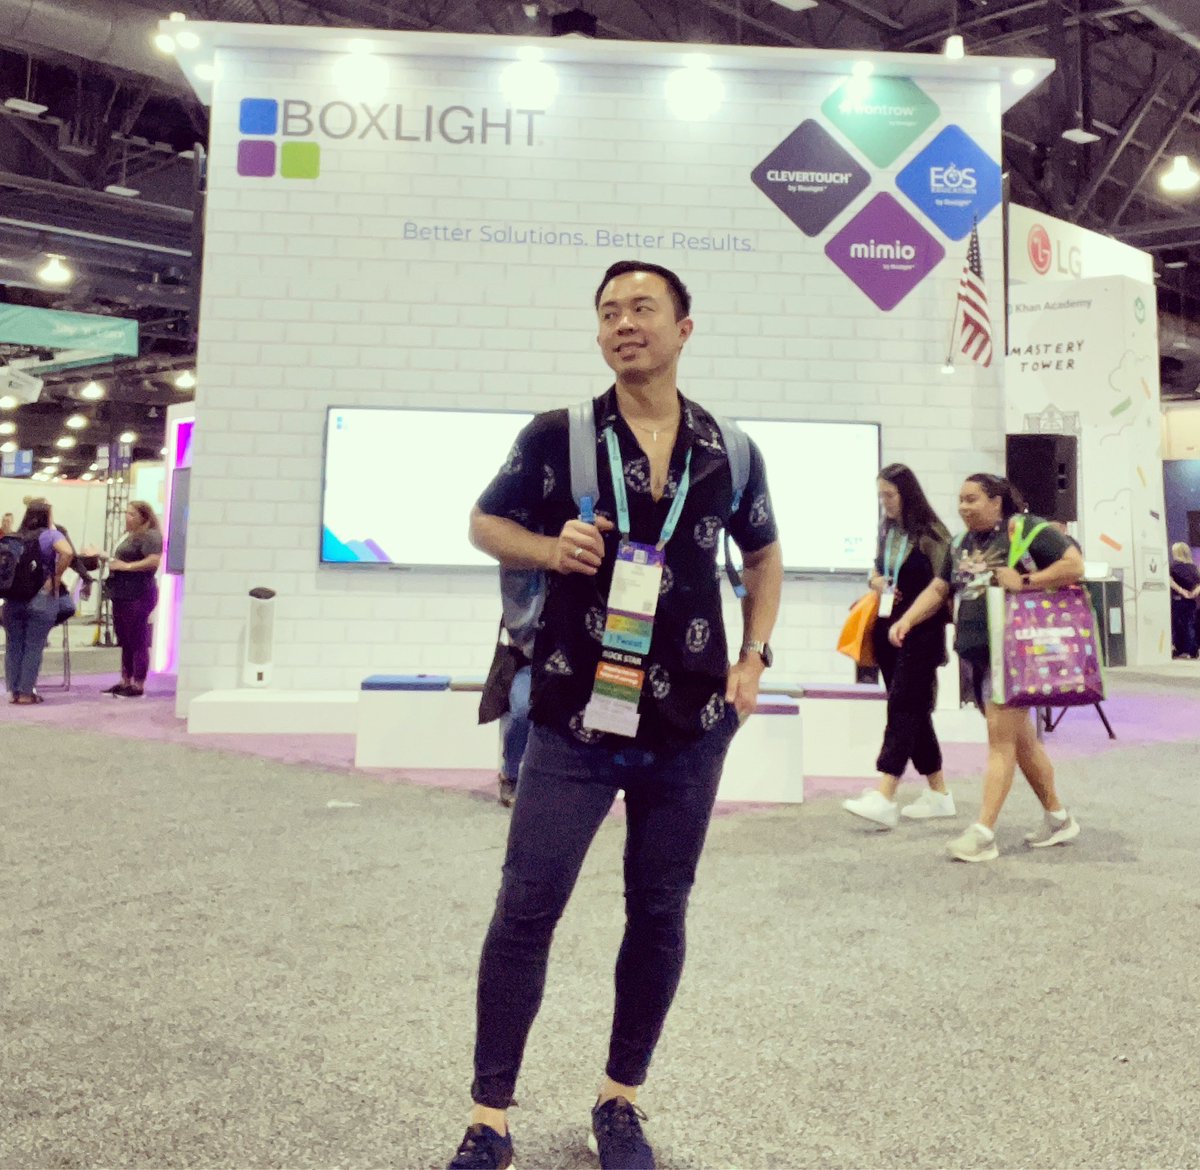 Day 4 & Last day  of #ISTELive23 
Thank you for the amazing, laser-focused student-teacher-admin PD sessions, heavily technology-infused activities, & overall fun learning experiences. I had a great time at my first #ISTELive conference. 
#ISTE
@ISTEofficial #PGCPSPROUD
 @pgcps